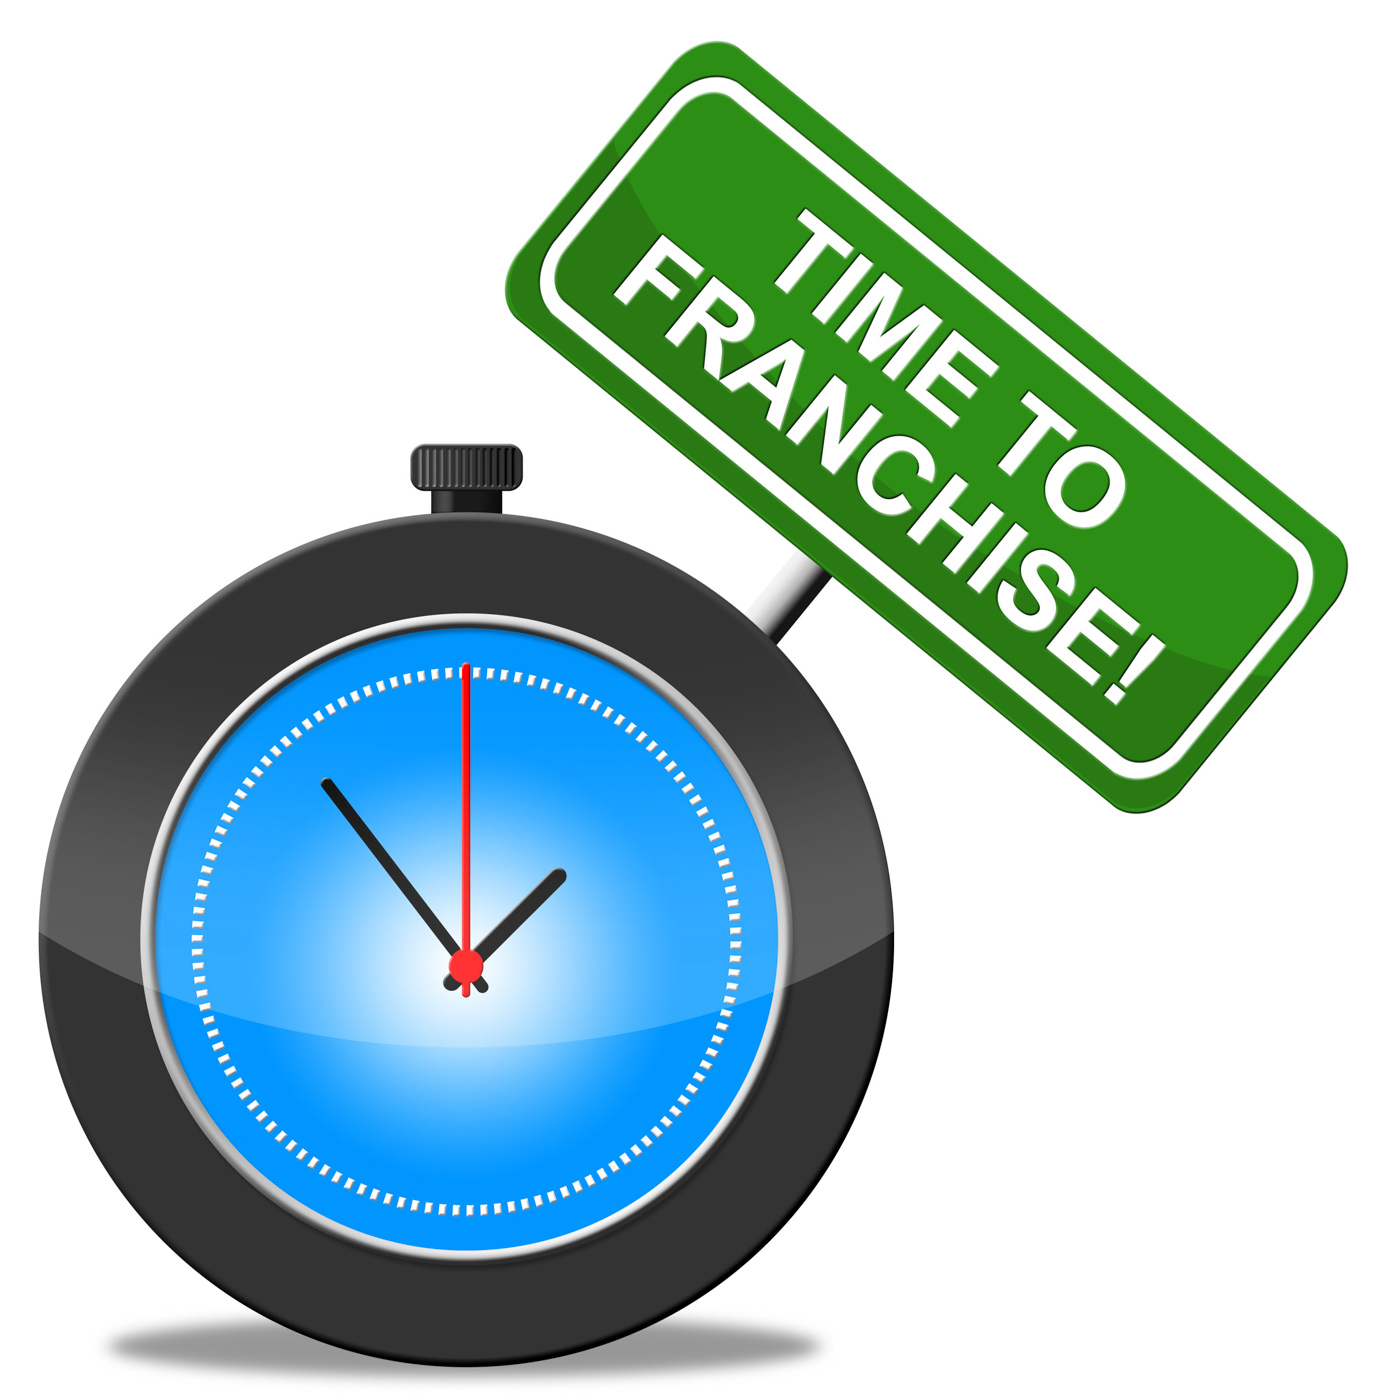 Time to franchise represents commercial concession and biz photo